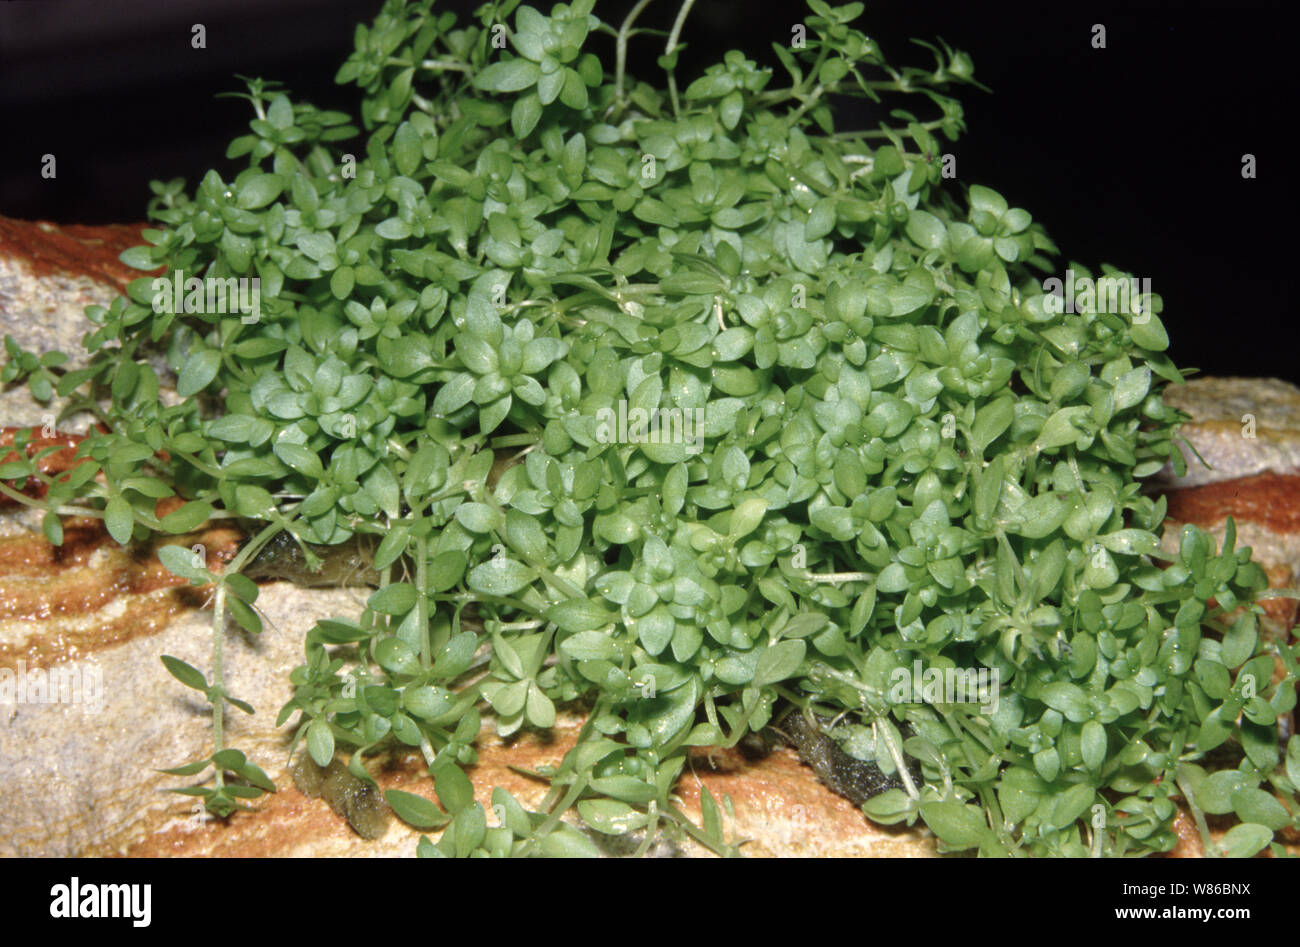 Pearl grass or weed, Hemianthus micranthemoides Stock Photo